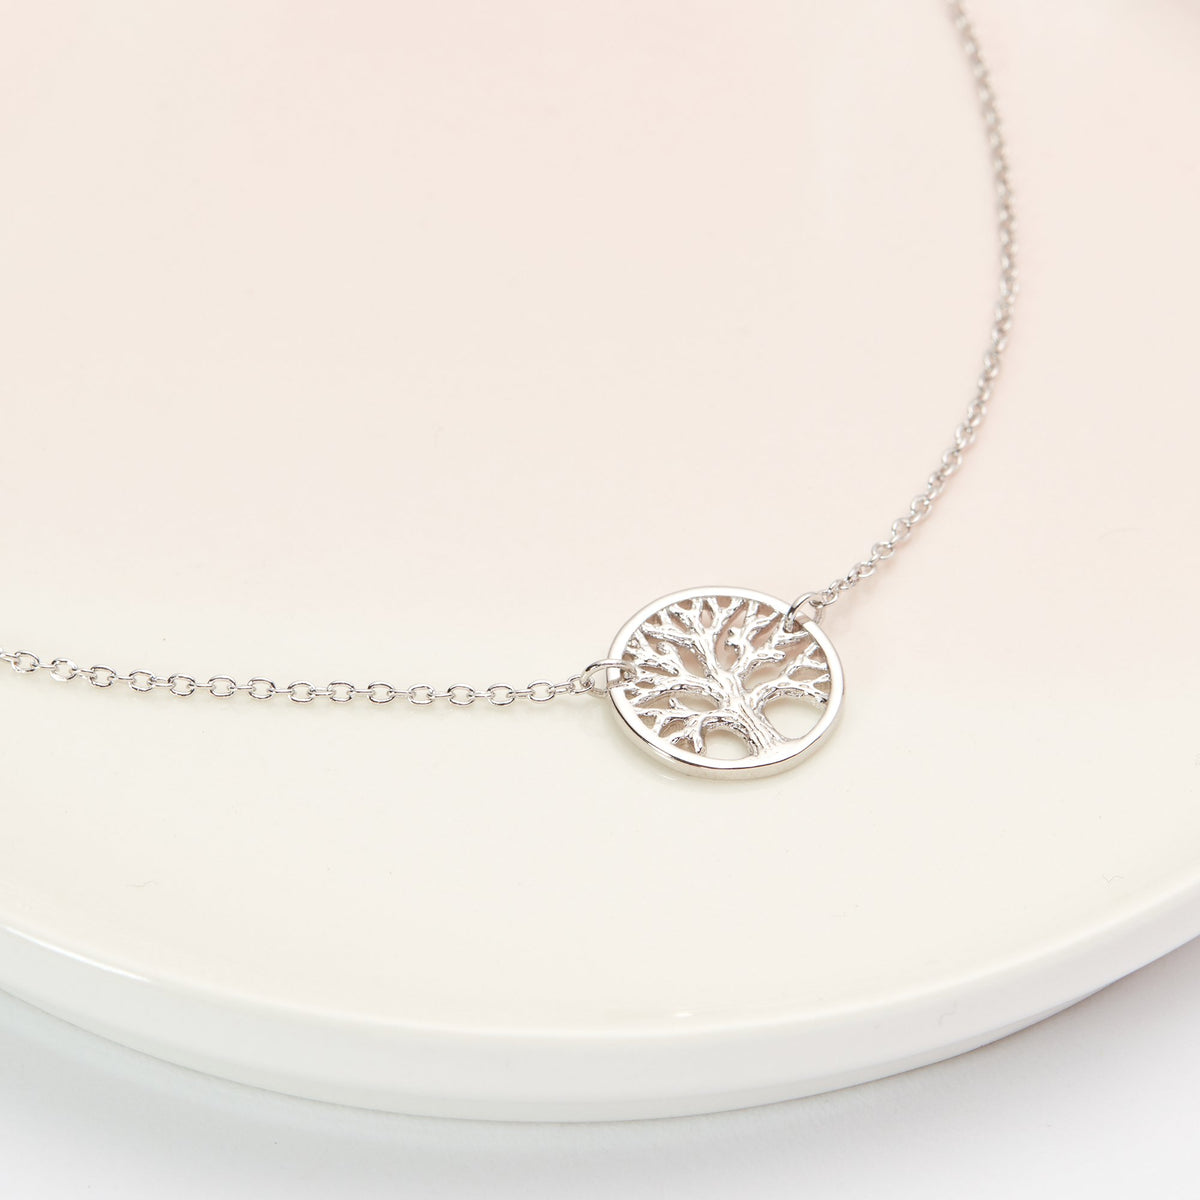 Christmas Gift for Best Friend Necklace - Dear Ava, Jewelry / Necklaces / Pendants